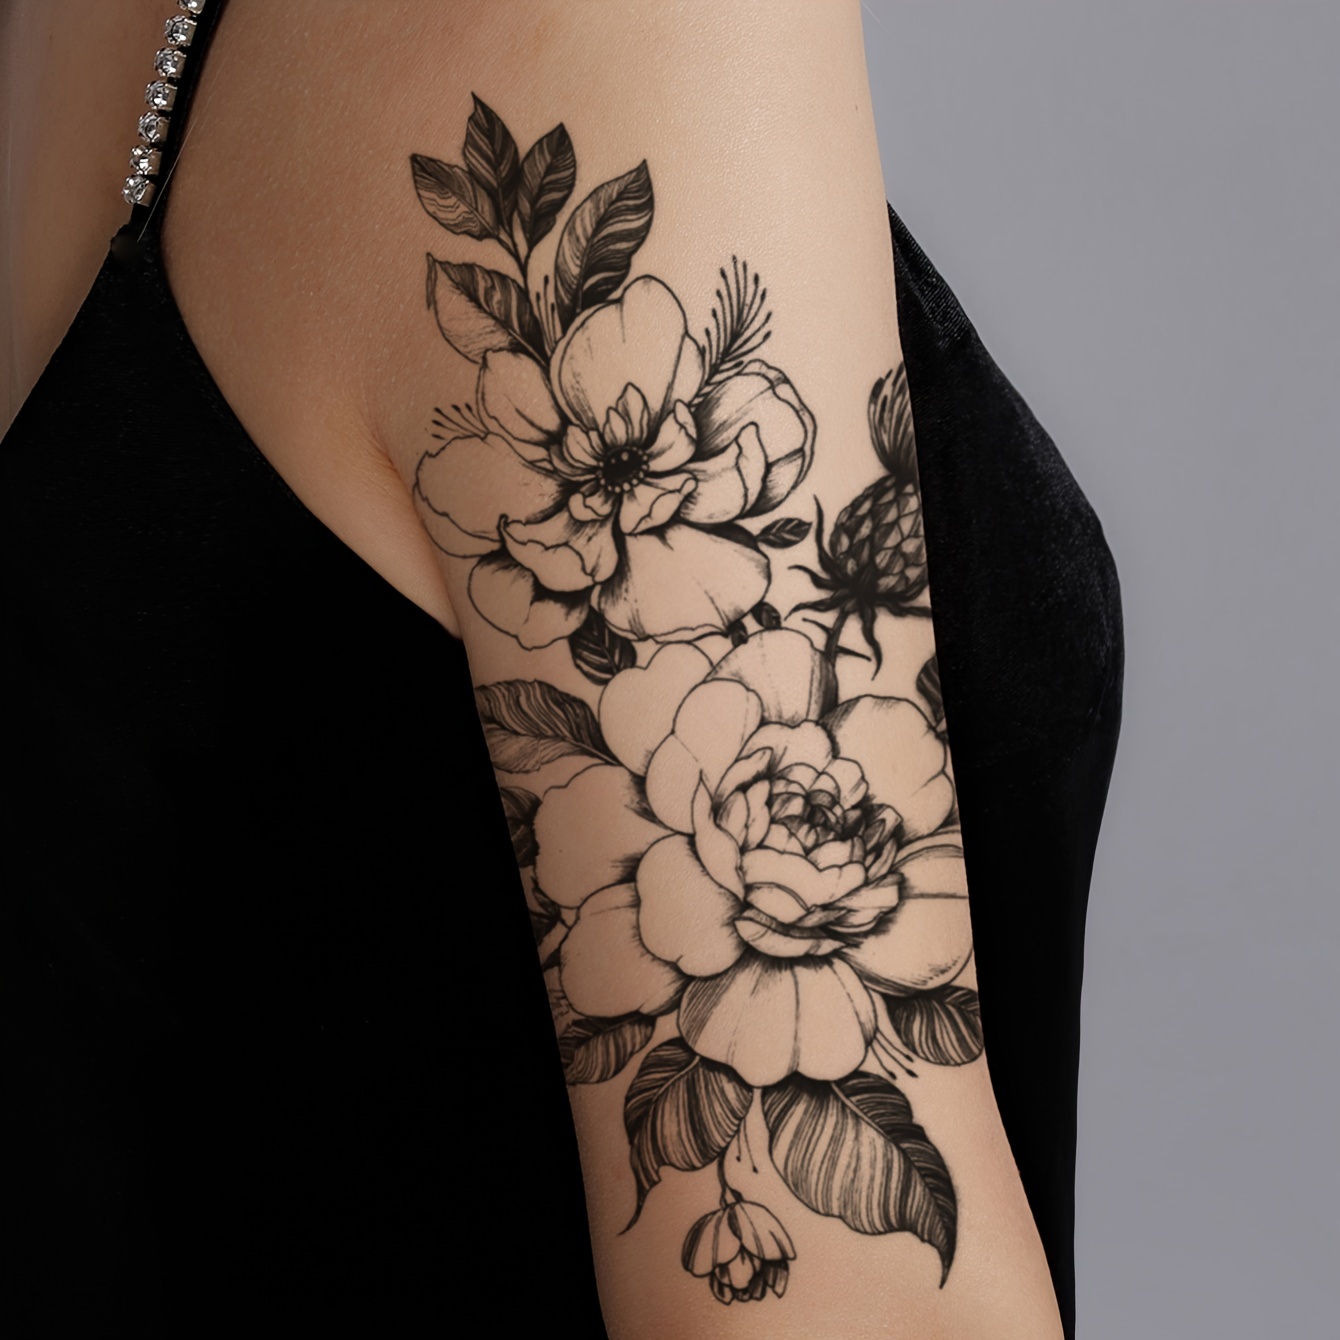 Large Realistic Flower Temporary Tattoos for Women Adults Girls Black Rose  Floral Tattoo Sexy Body Tattoo Stickers Realistic Waterproof Fake Tattoo  Arm Chest Leg Back Temp Tattoo Paper (8 Sheets)